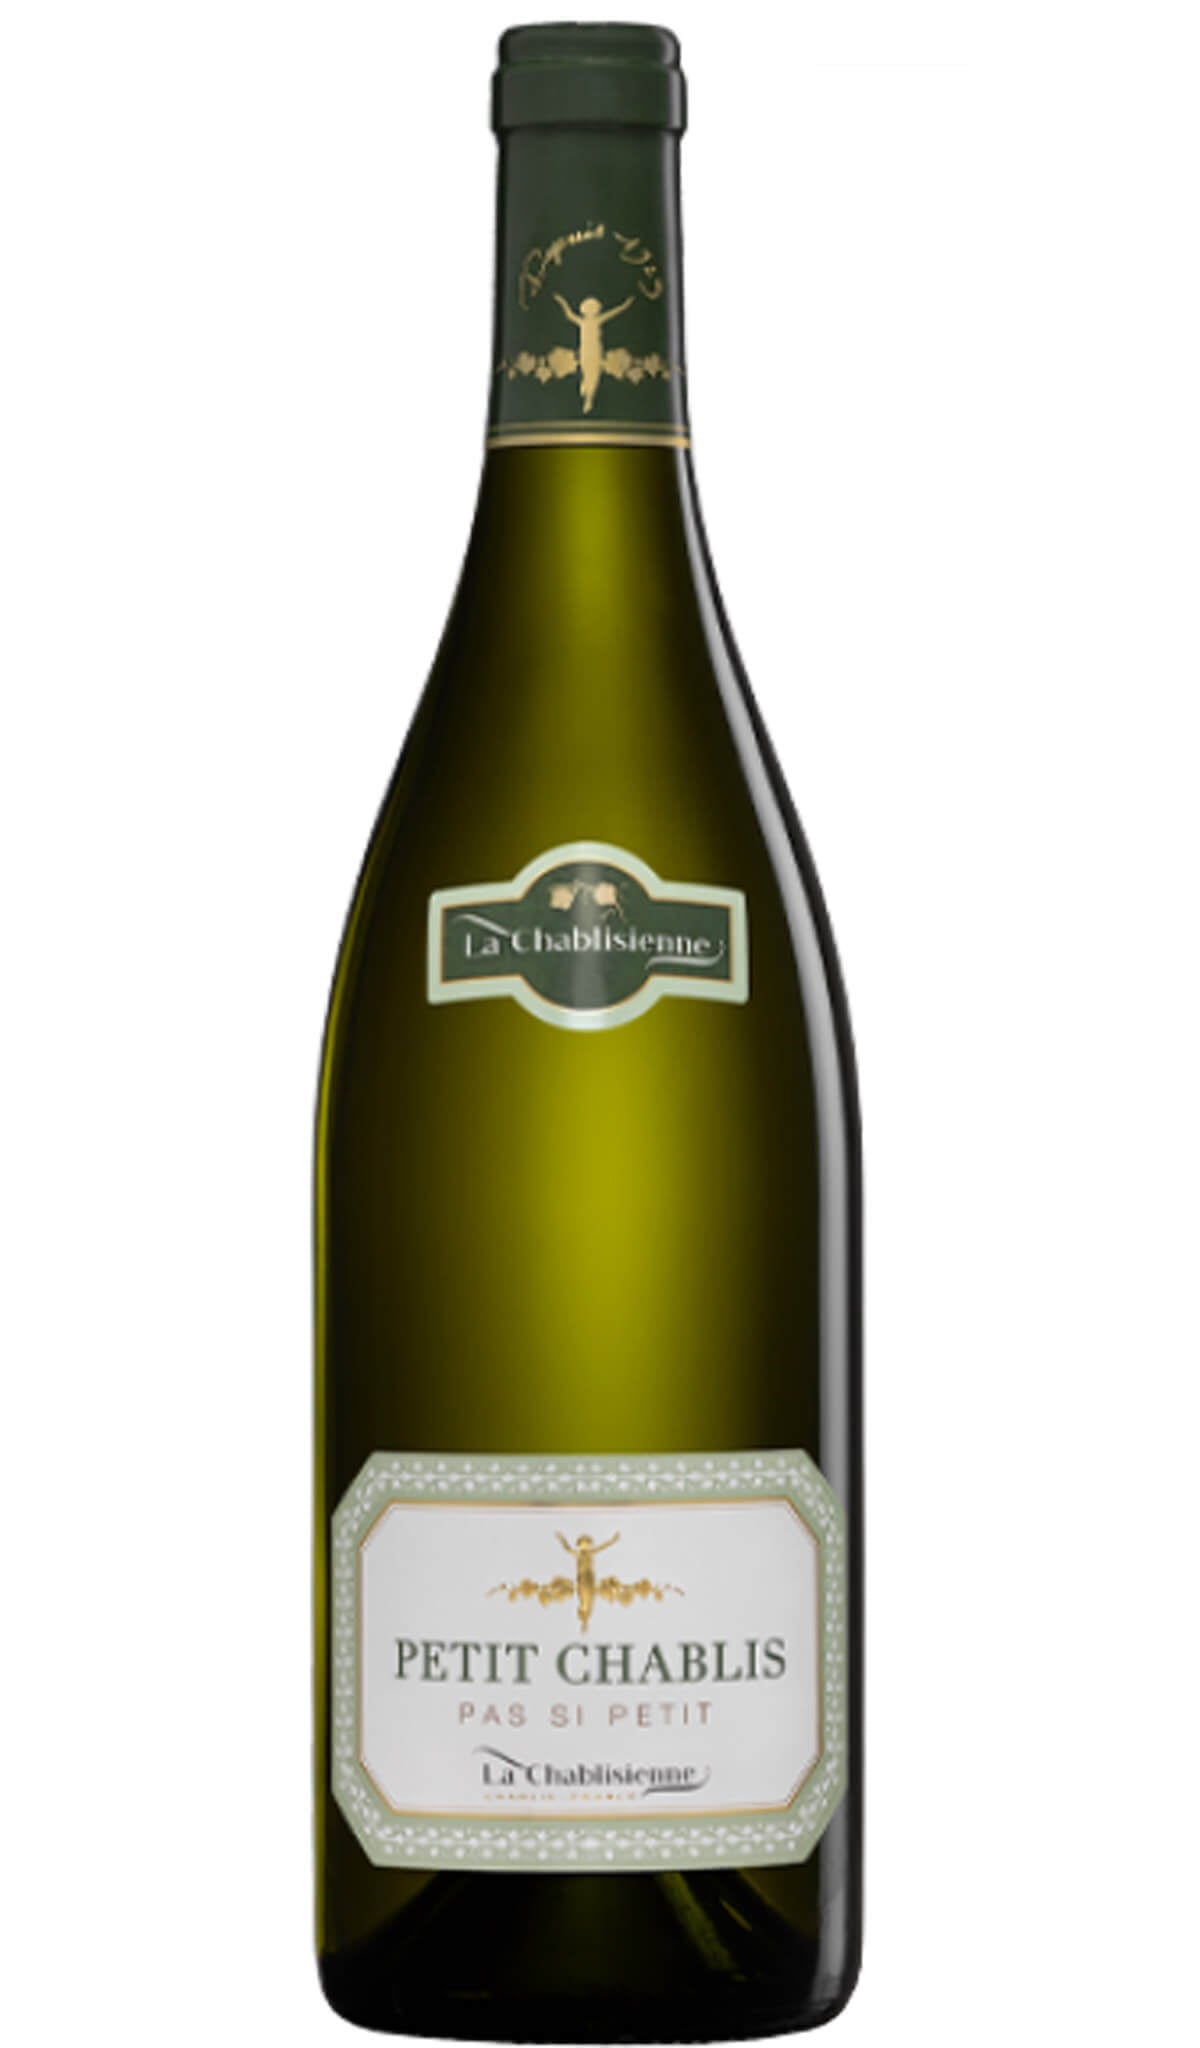 Find out more, explore the range and buy La Chablisienne 'Pas Si Petit' Petit Chablis 2022 available online at Wine Sellers Direct - Australia's independent liquor specialists.